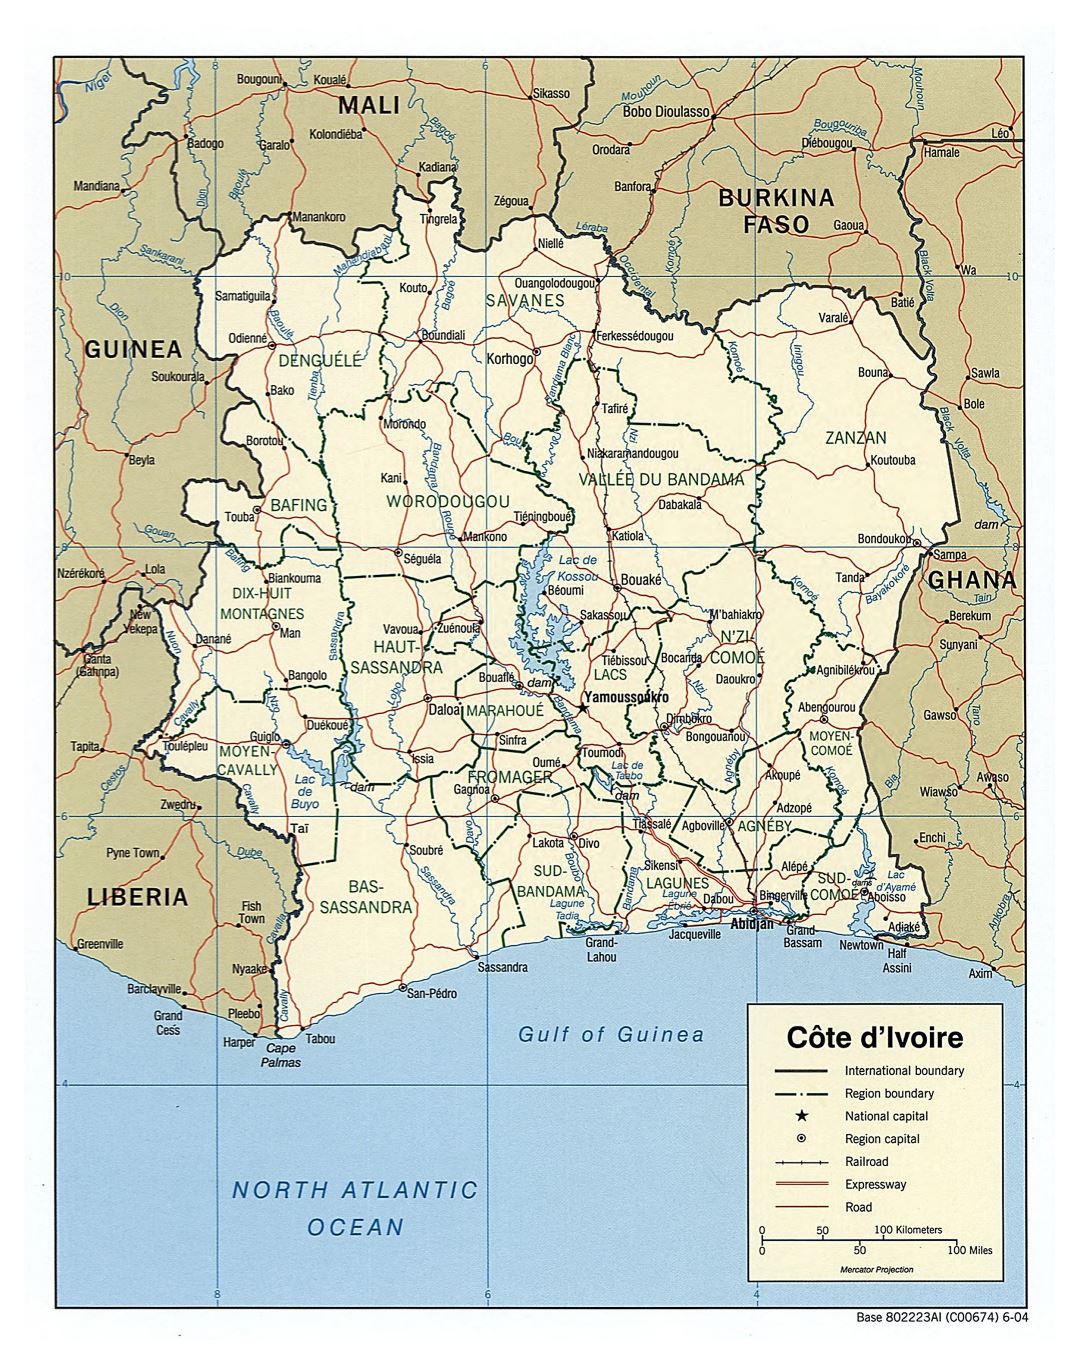 Large scale political and administrative map of Cote d'Ivoire with roads, railroads and major cities - 2004